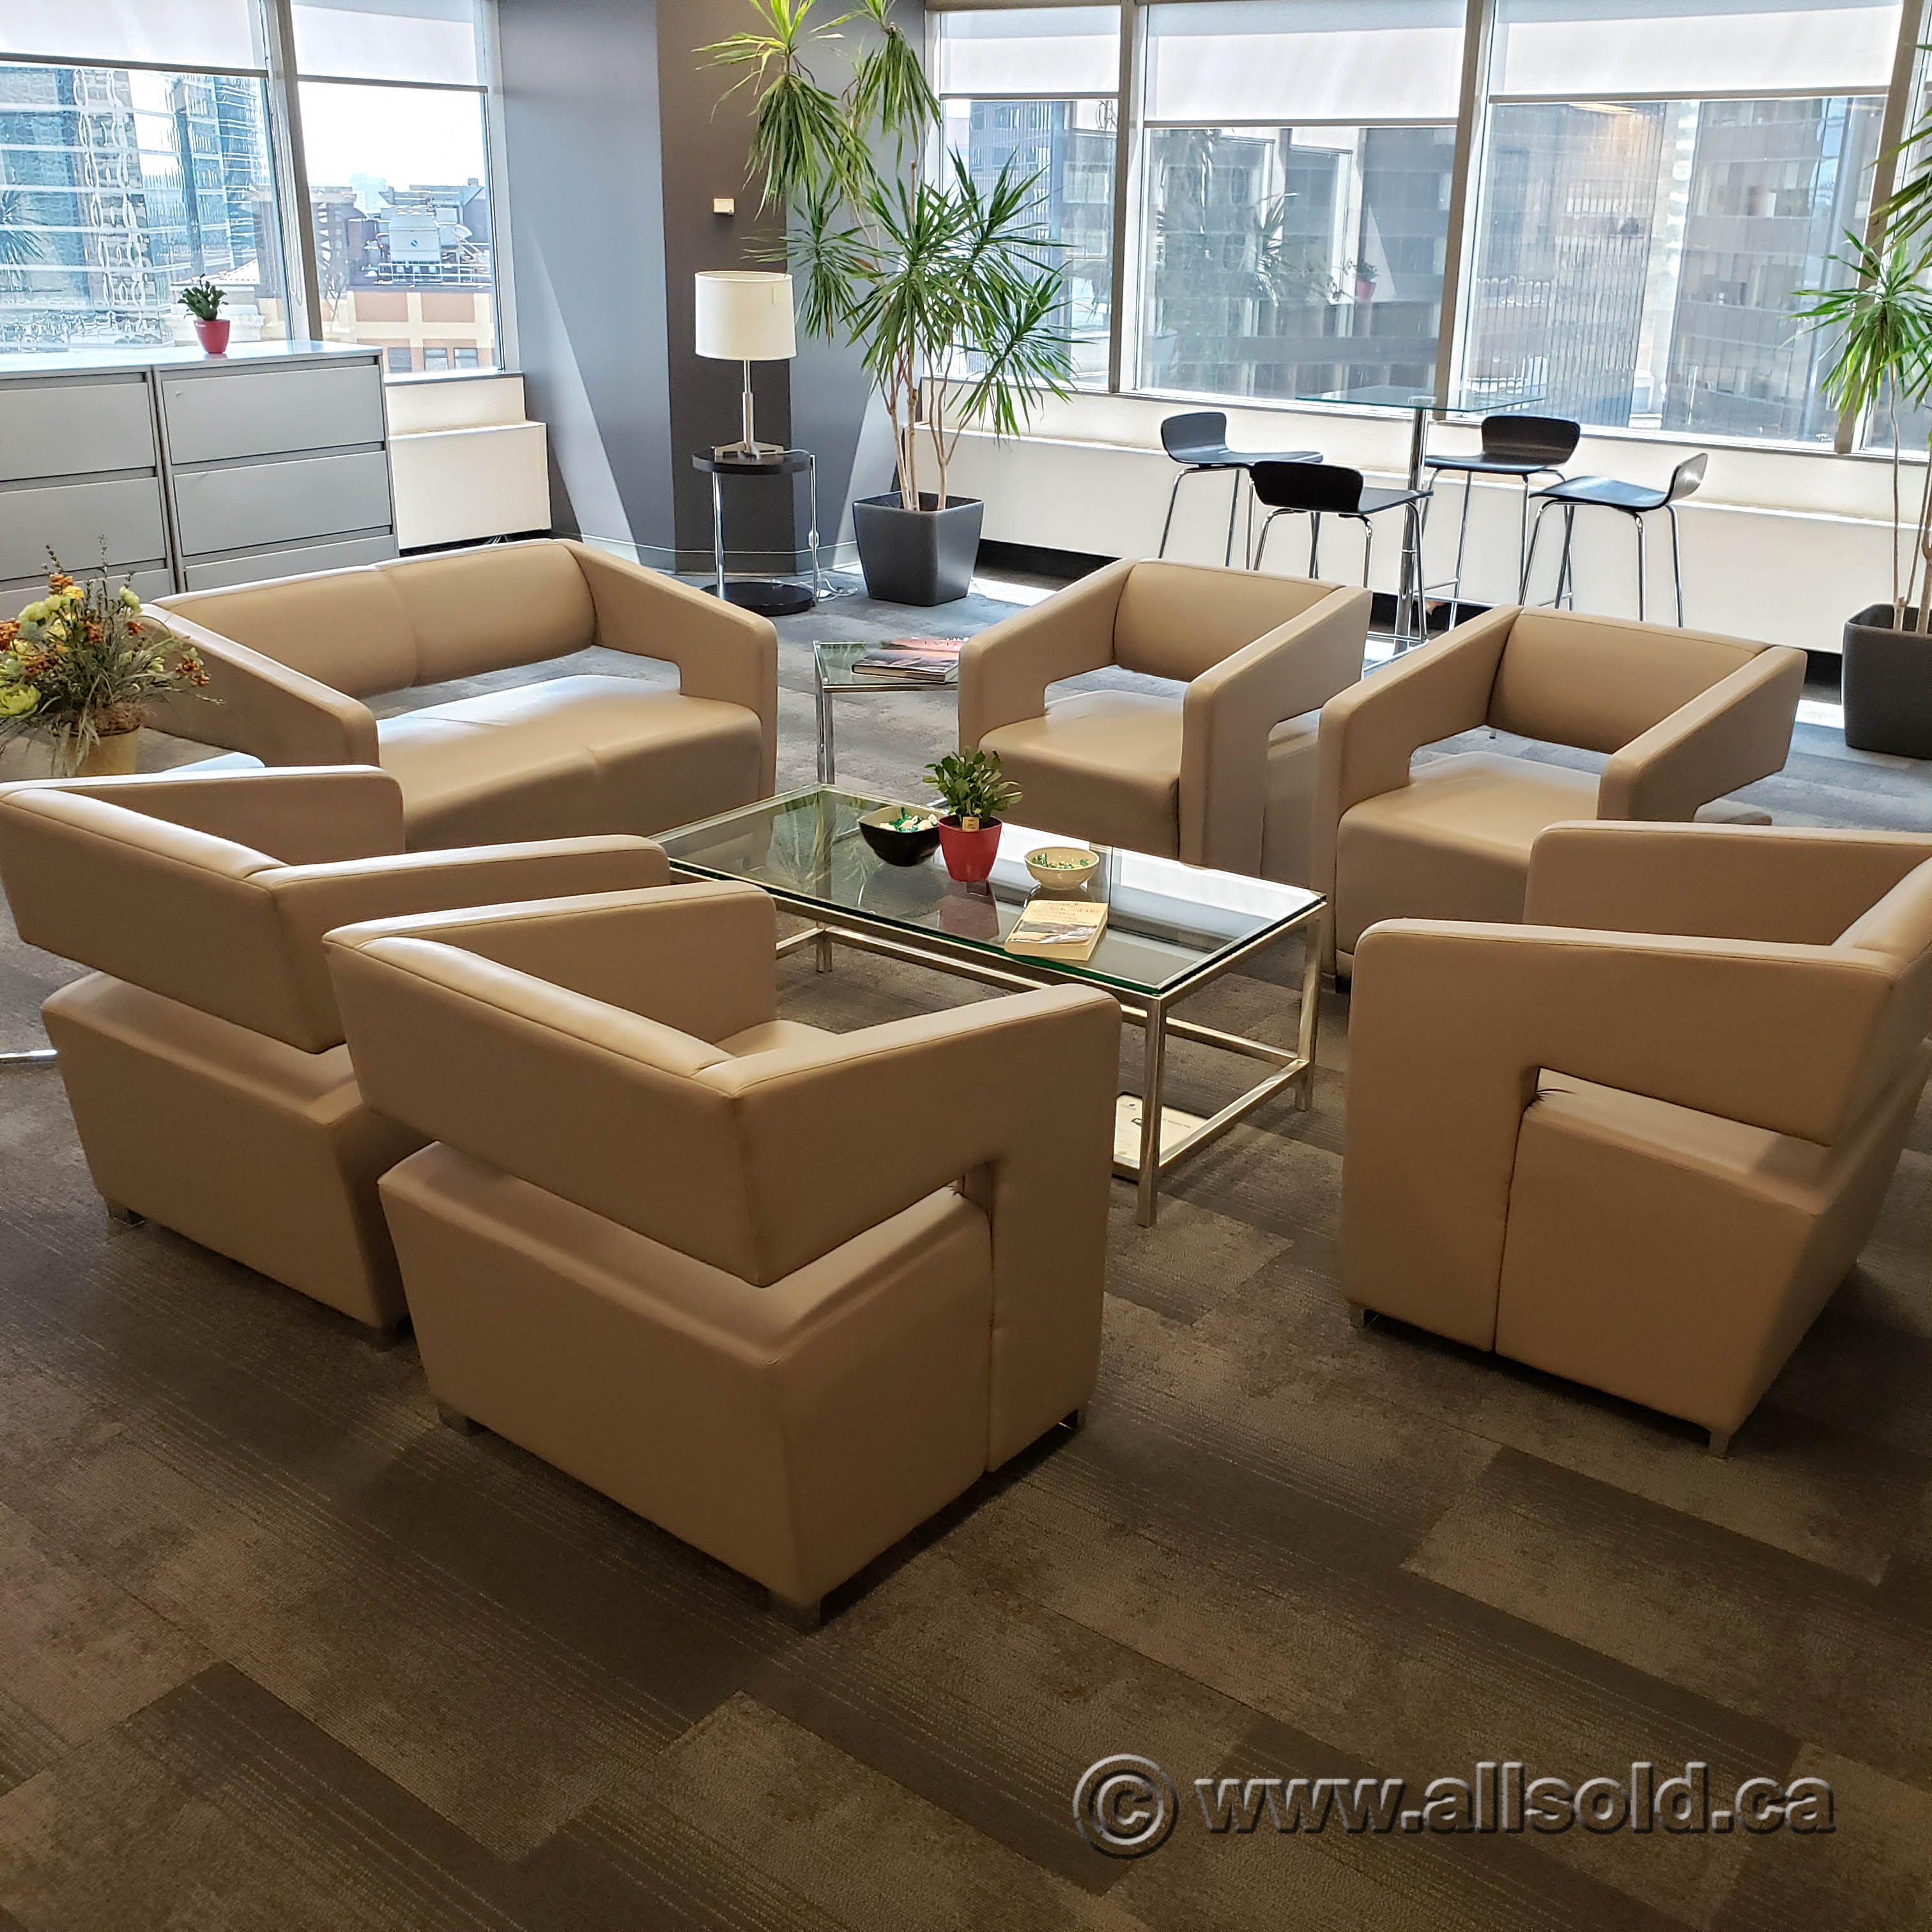 Contemporary Modern Beige Leather Lobby Reception Furniture - Allsold ...